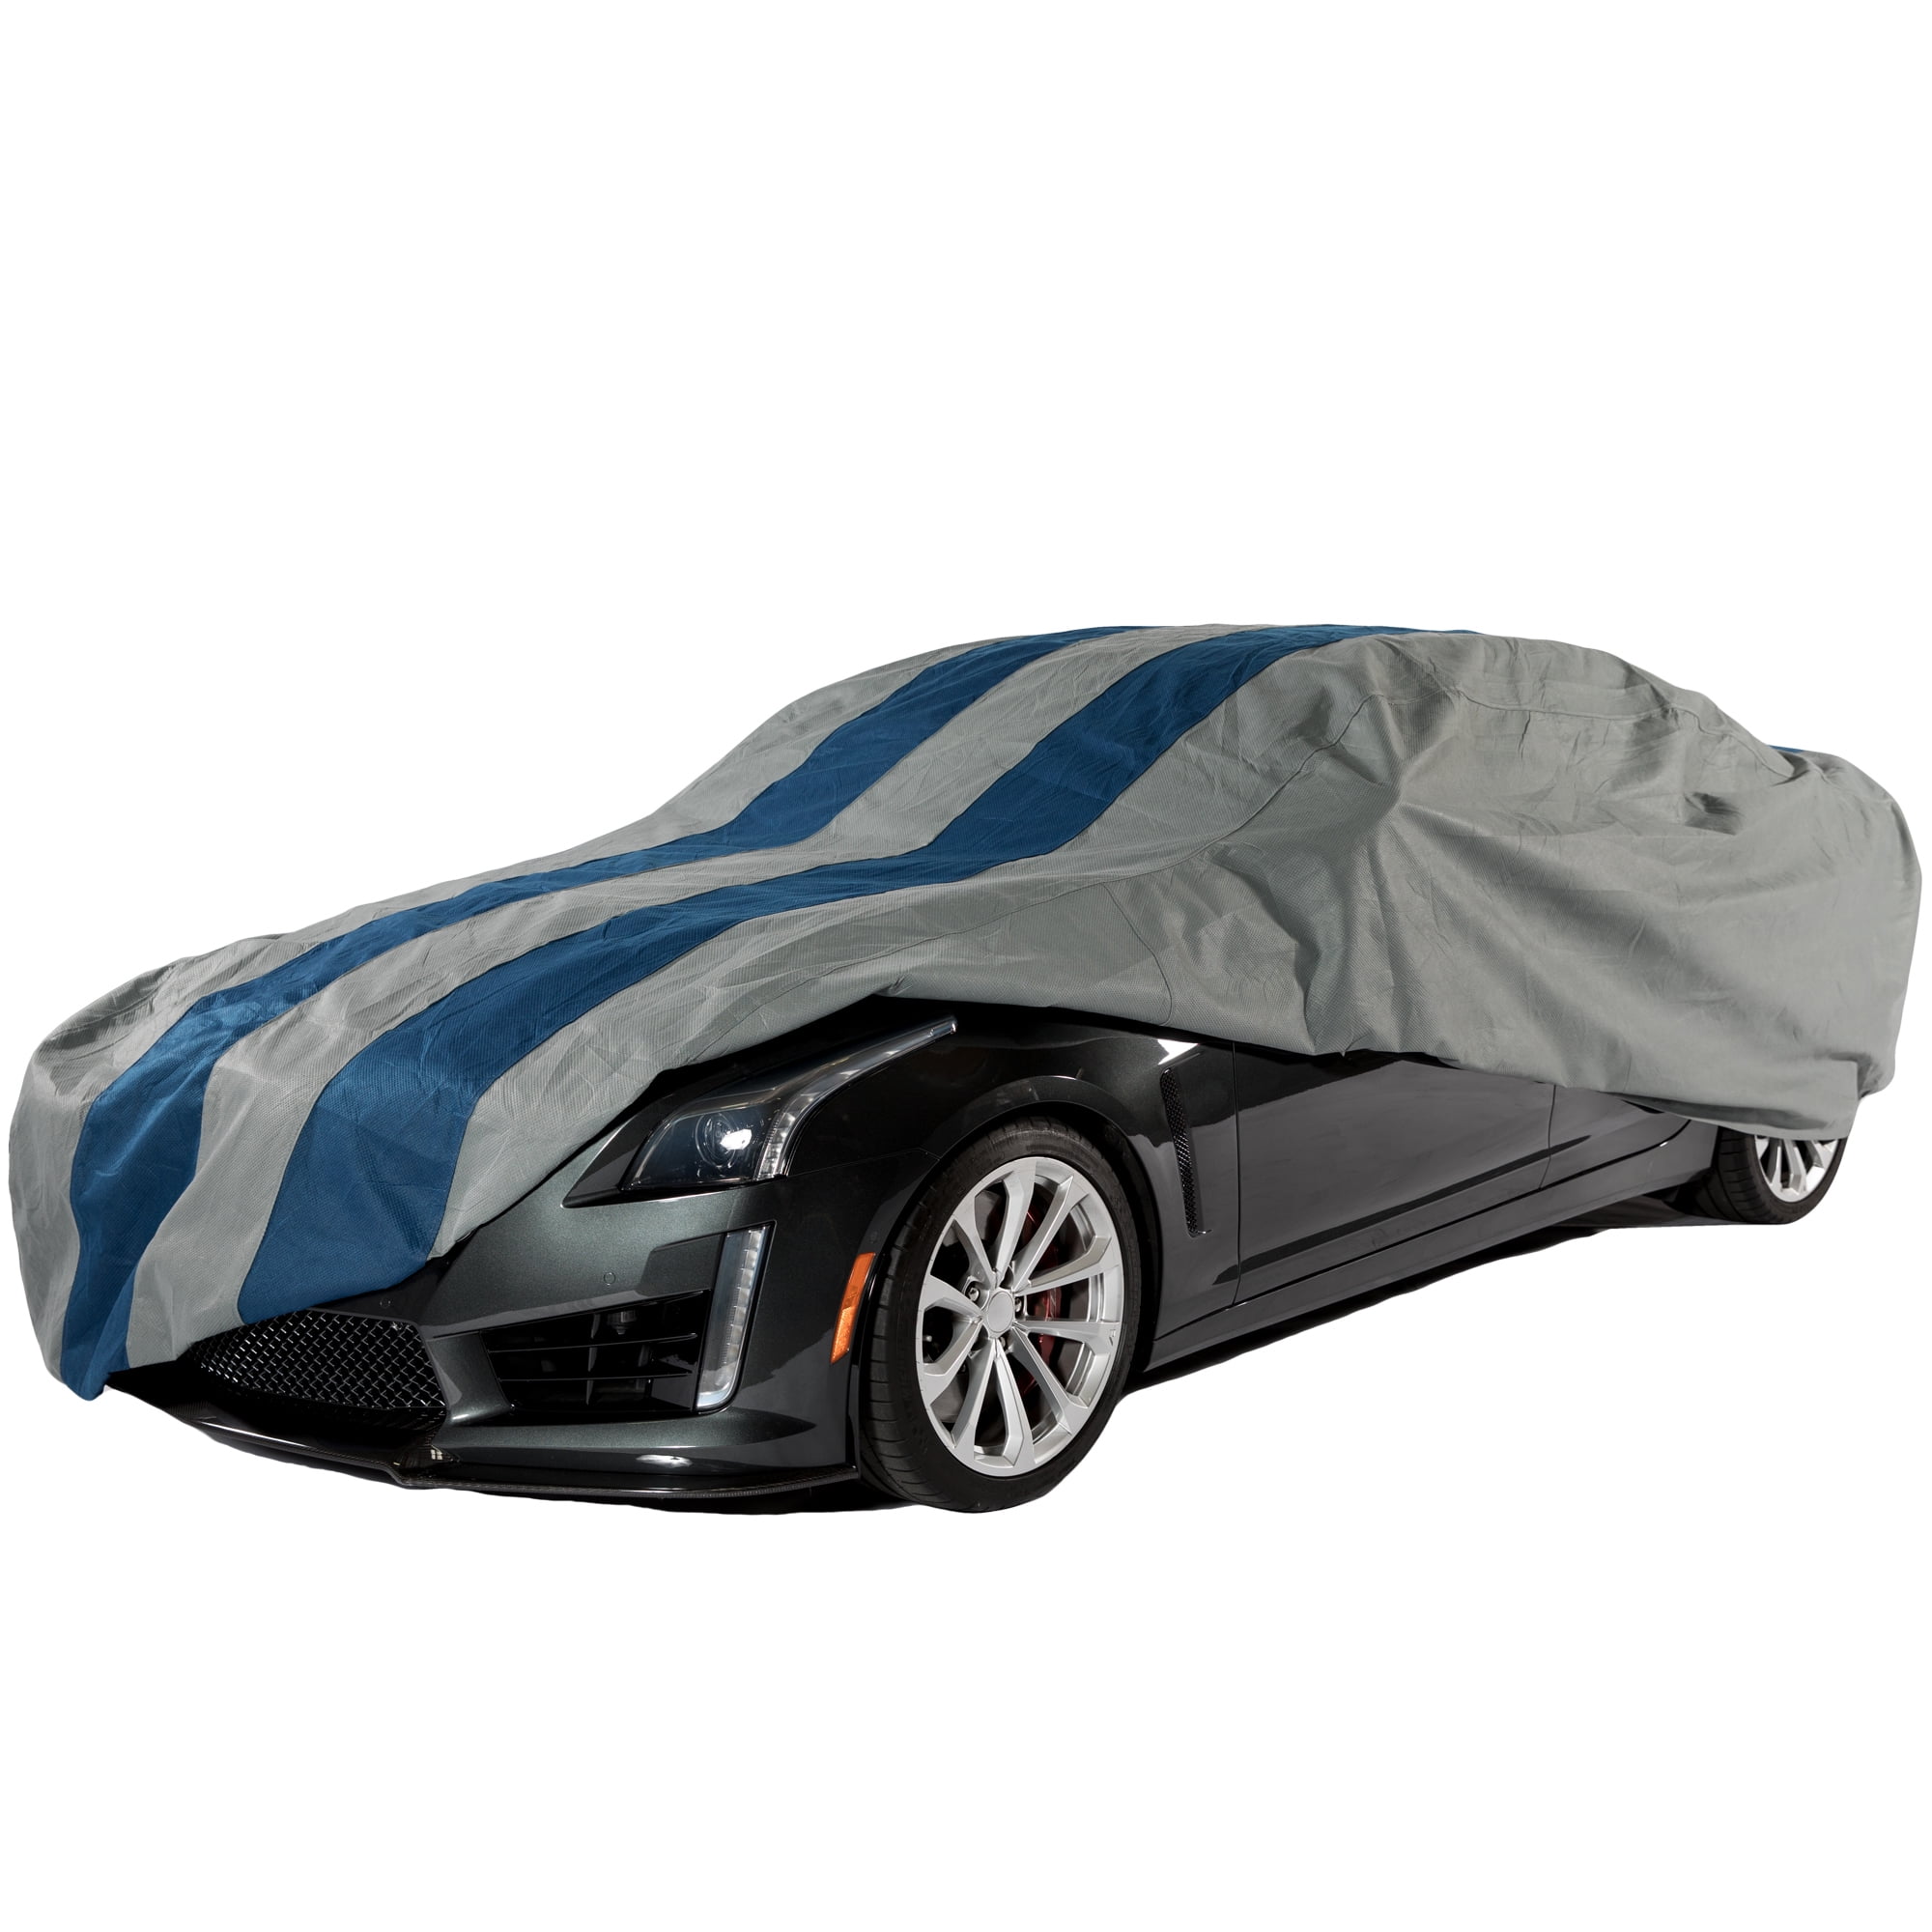 Duck Covers Weather Defender Car Cover for Sedans up to 16 8 